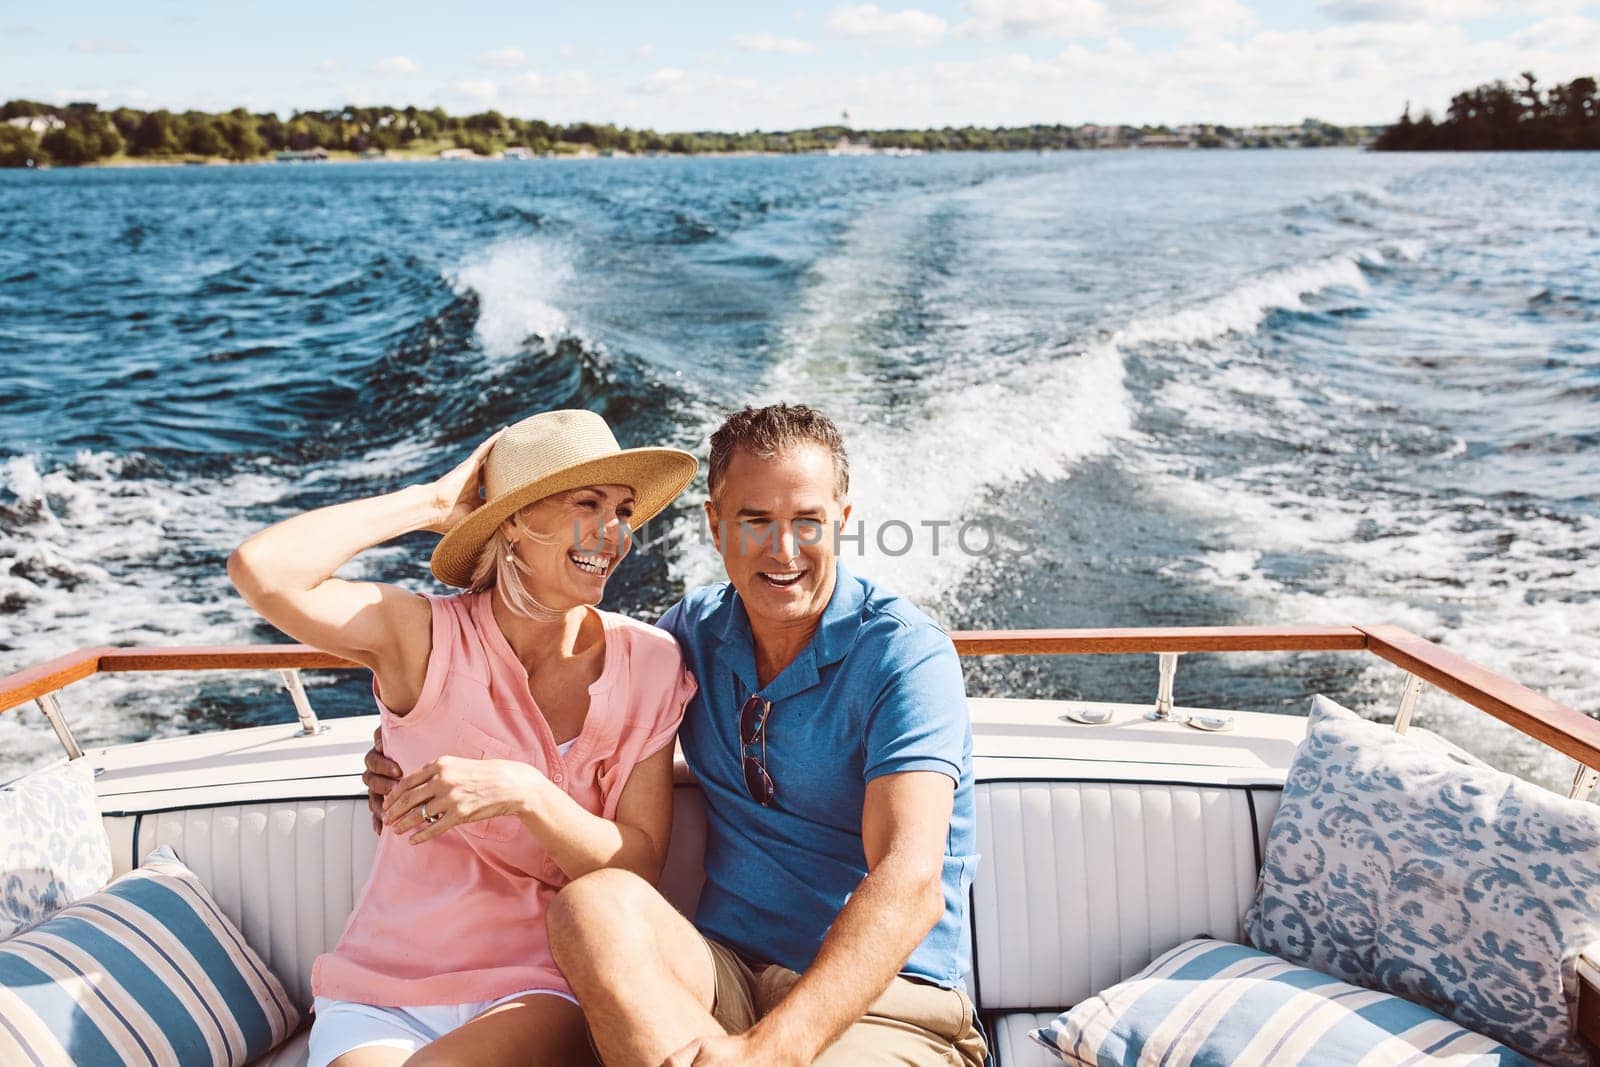 Its not where you go, its who you travel with. a mature couple enjoying a relaxing boat ride